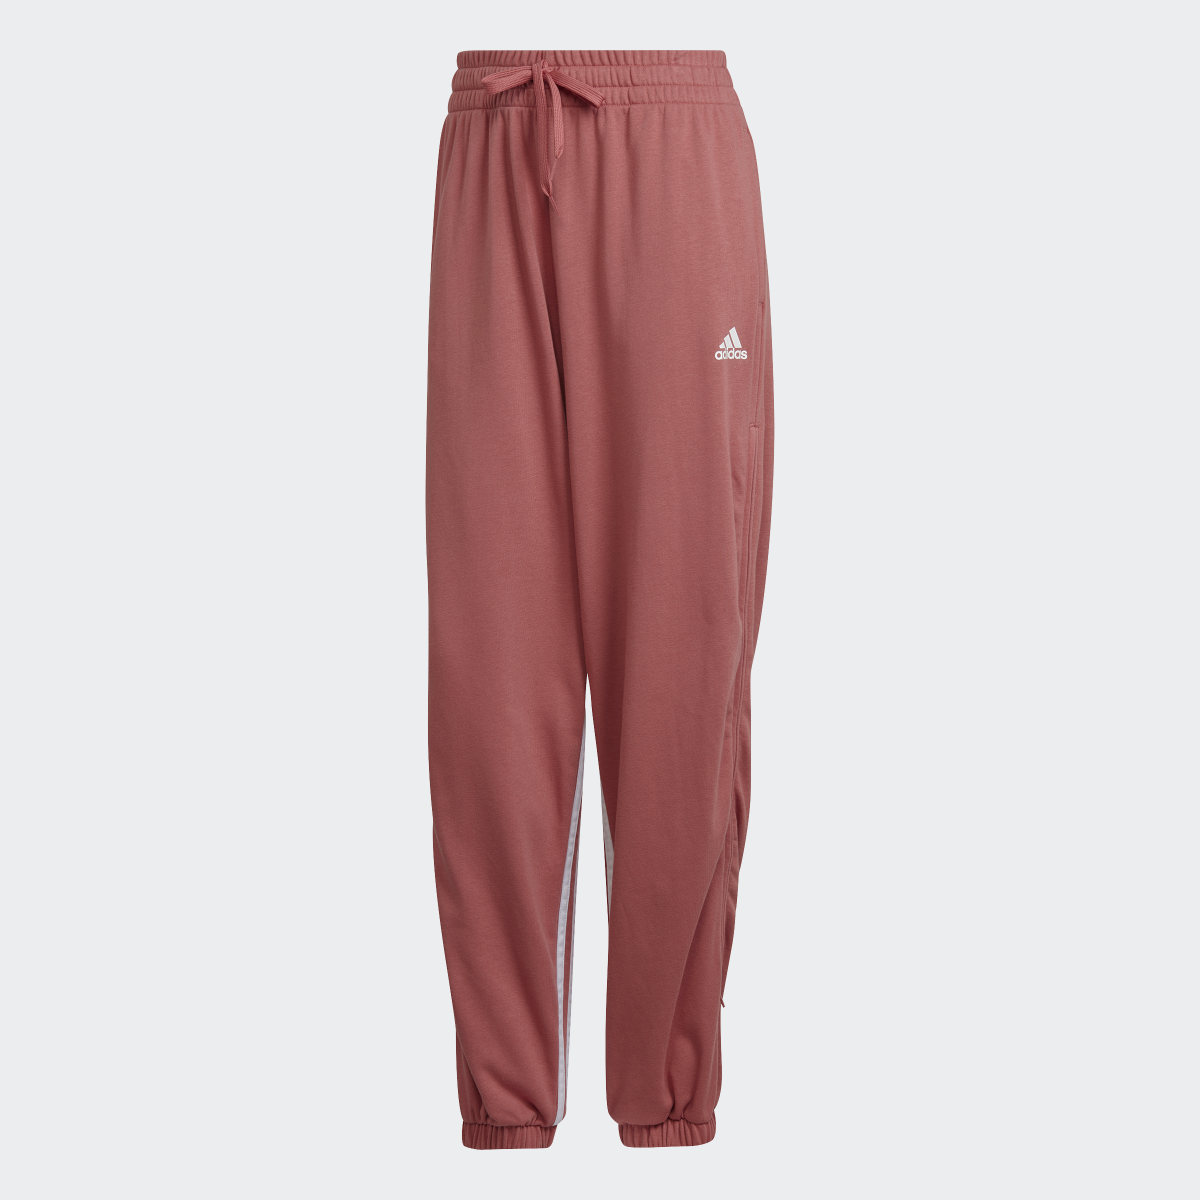 Adidas Hyperglam 3-Stripes Oversized Cuffed Joggers with Side Zippers. 4